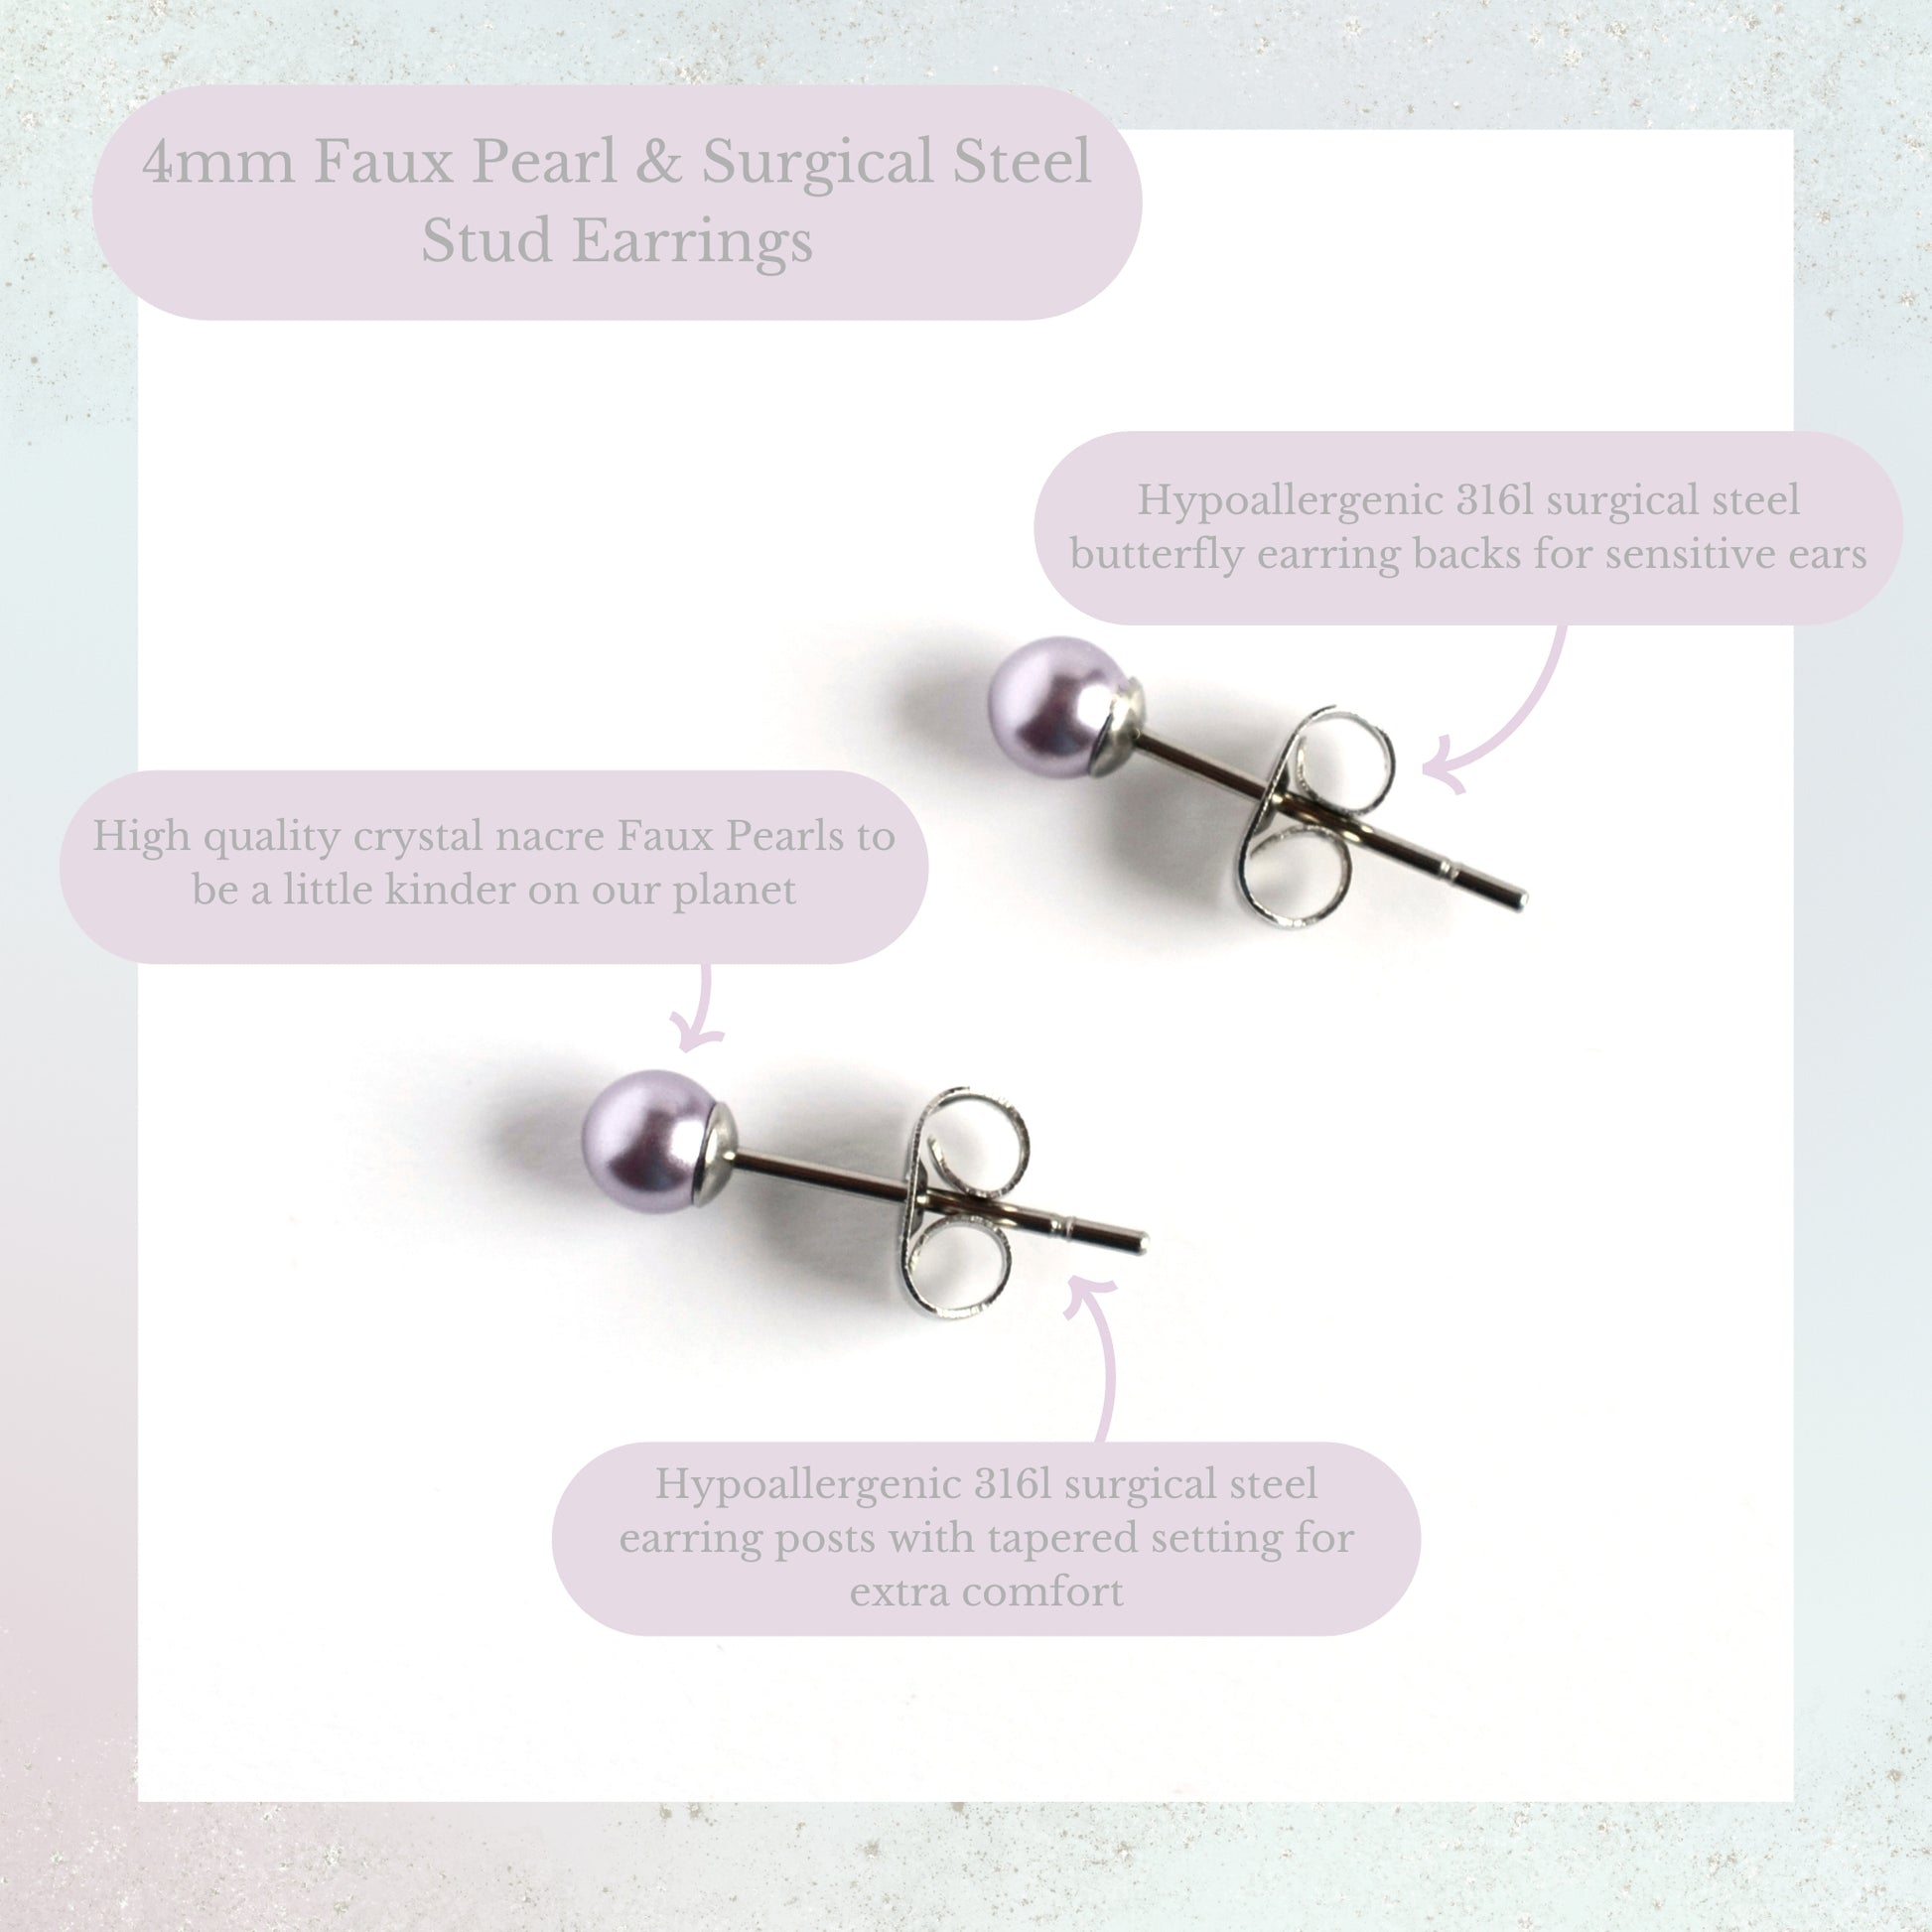 4mm faux pearl and surgical steel stud earring product information graphic